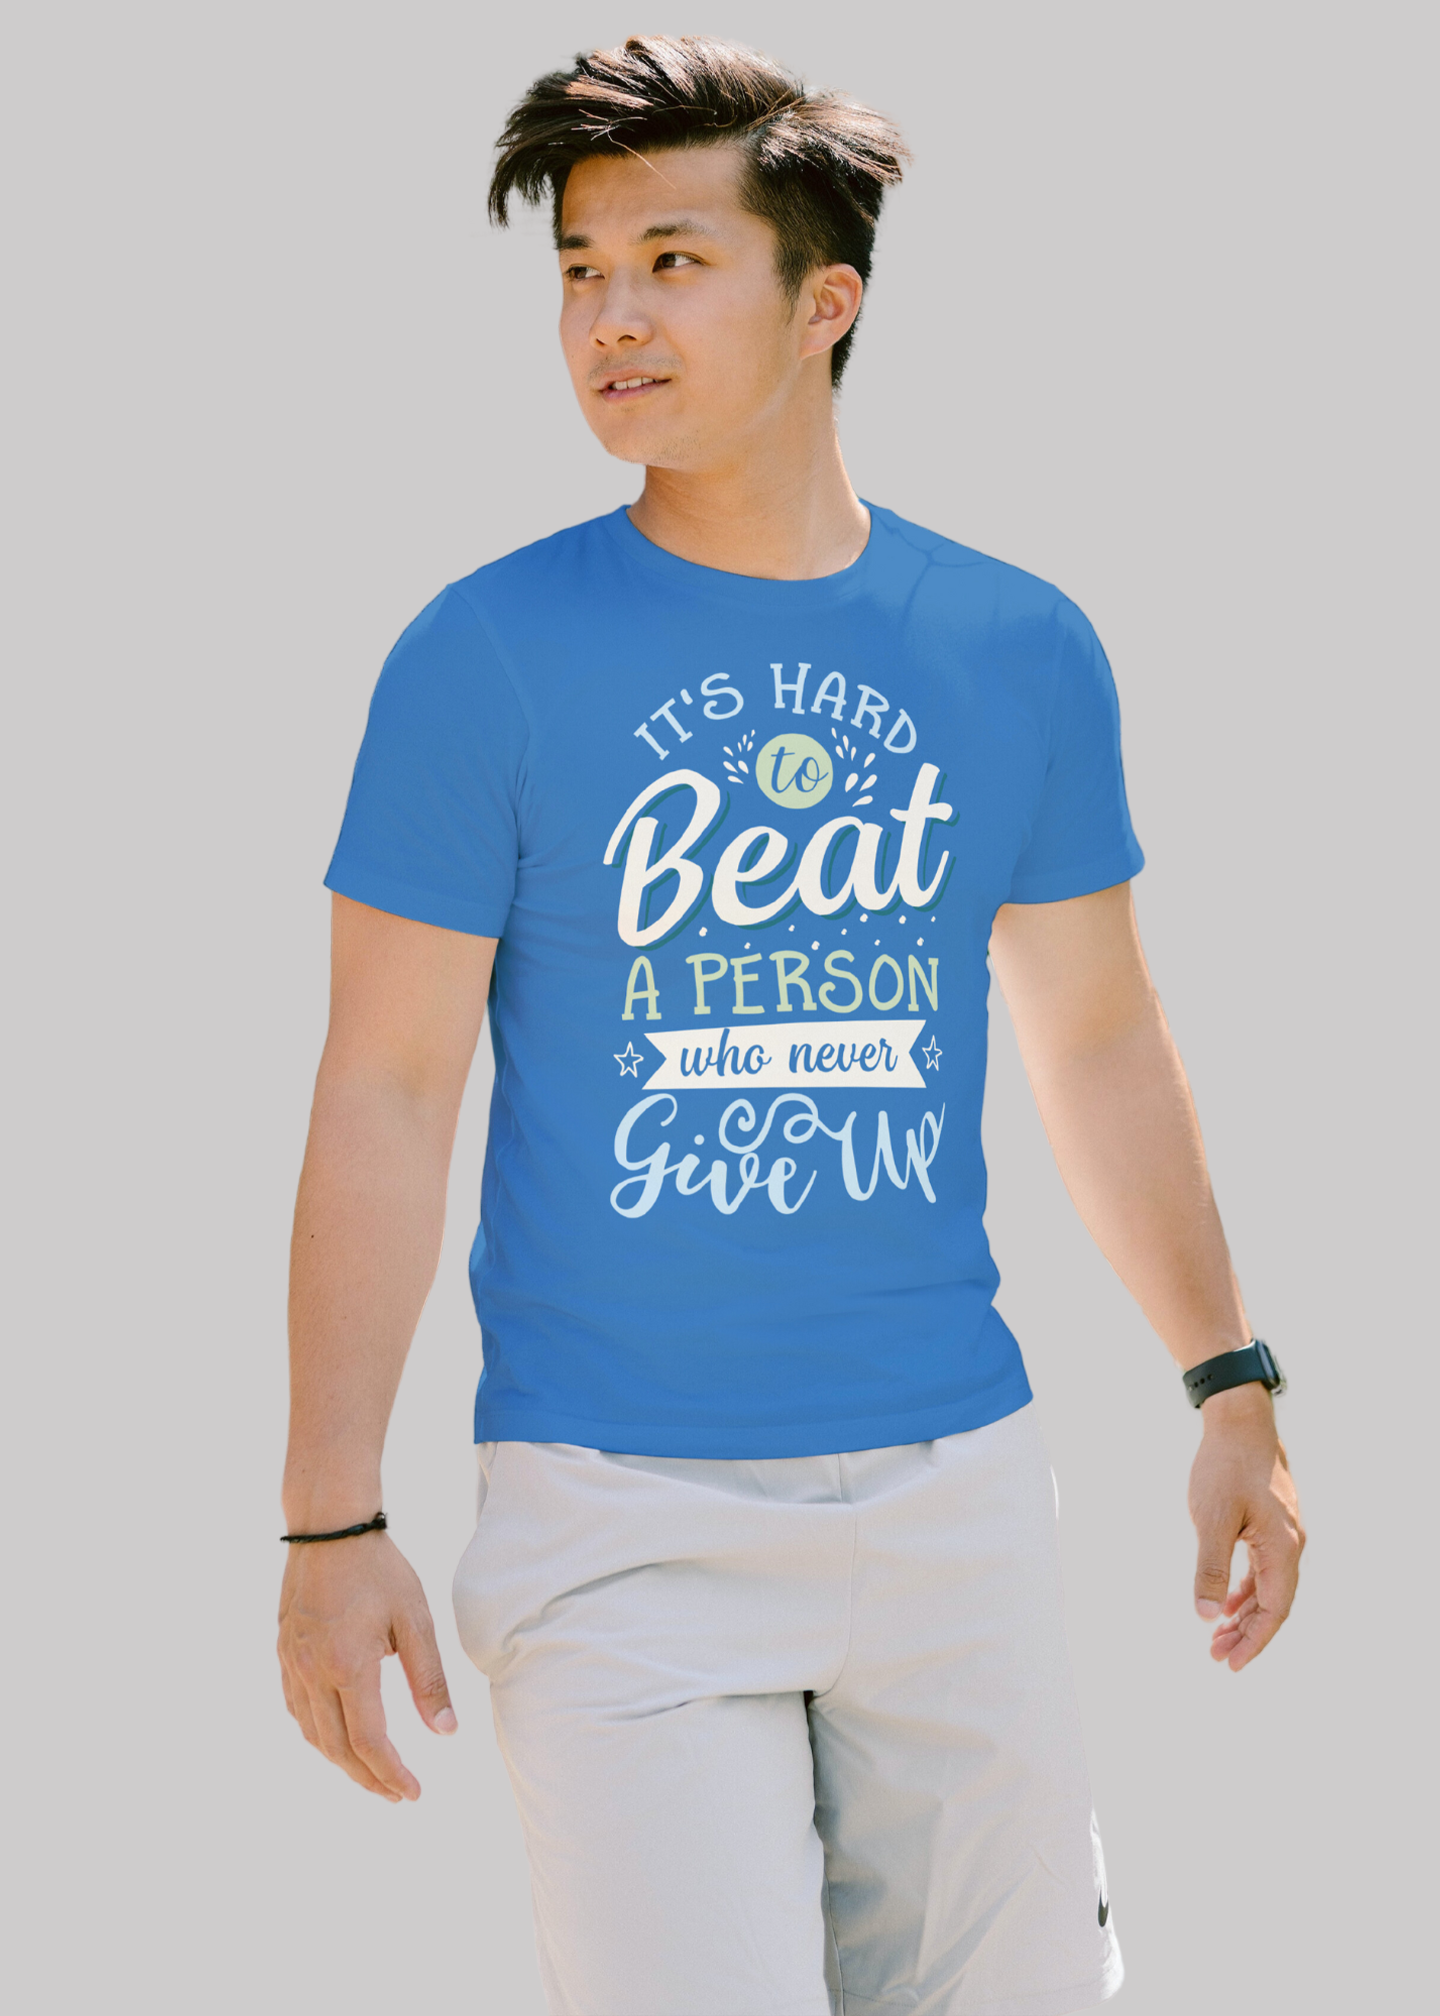 It's hard to beat a person who never give up Printed Half Sleeve Premium Cotton T-shirt For Men